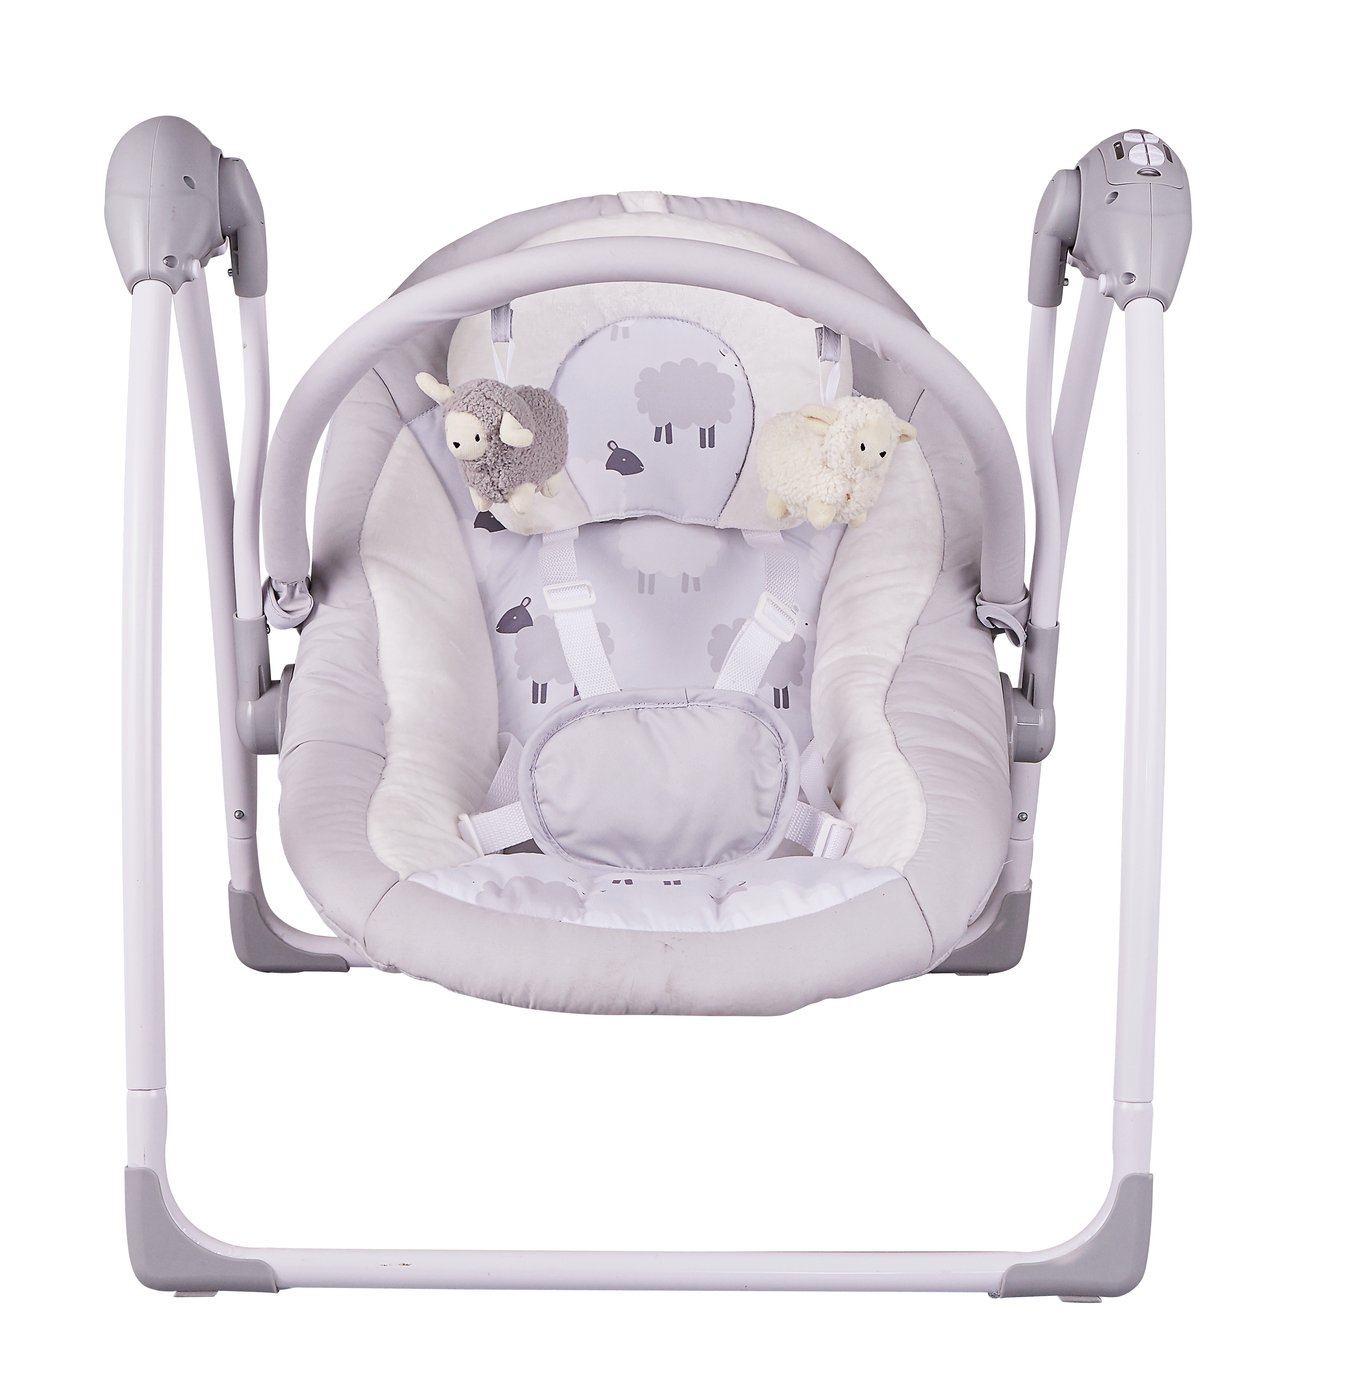 Cuggl Music & Sounds Baby Swing review